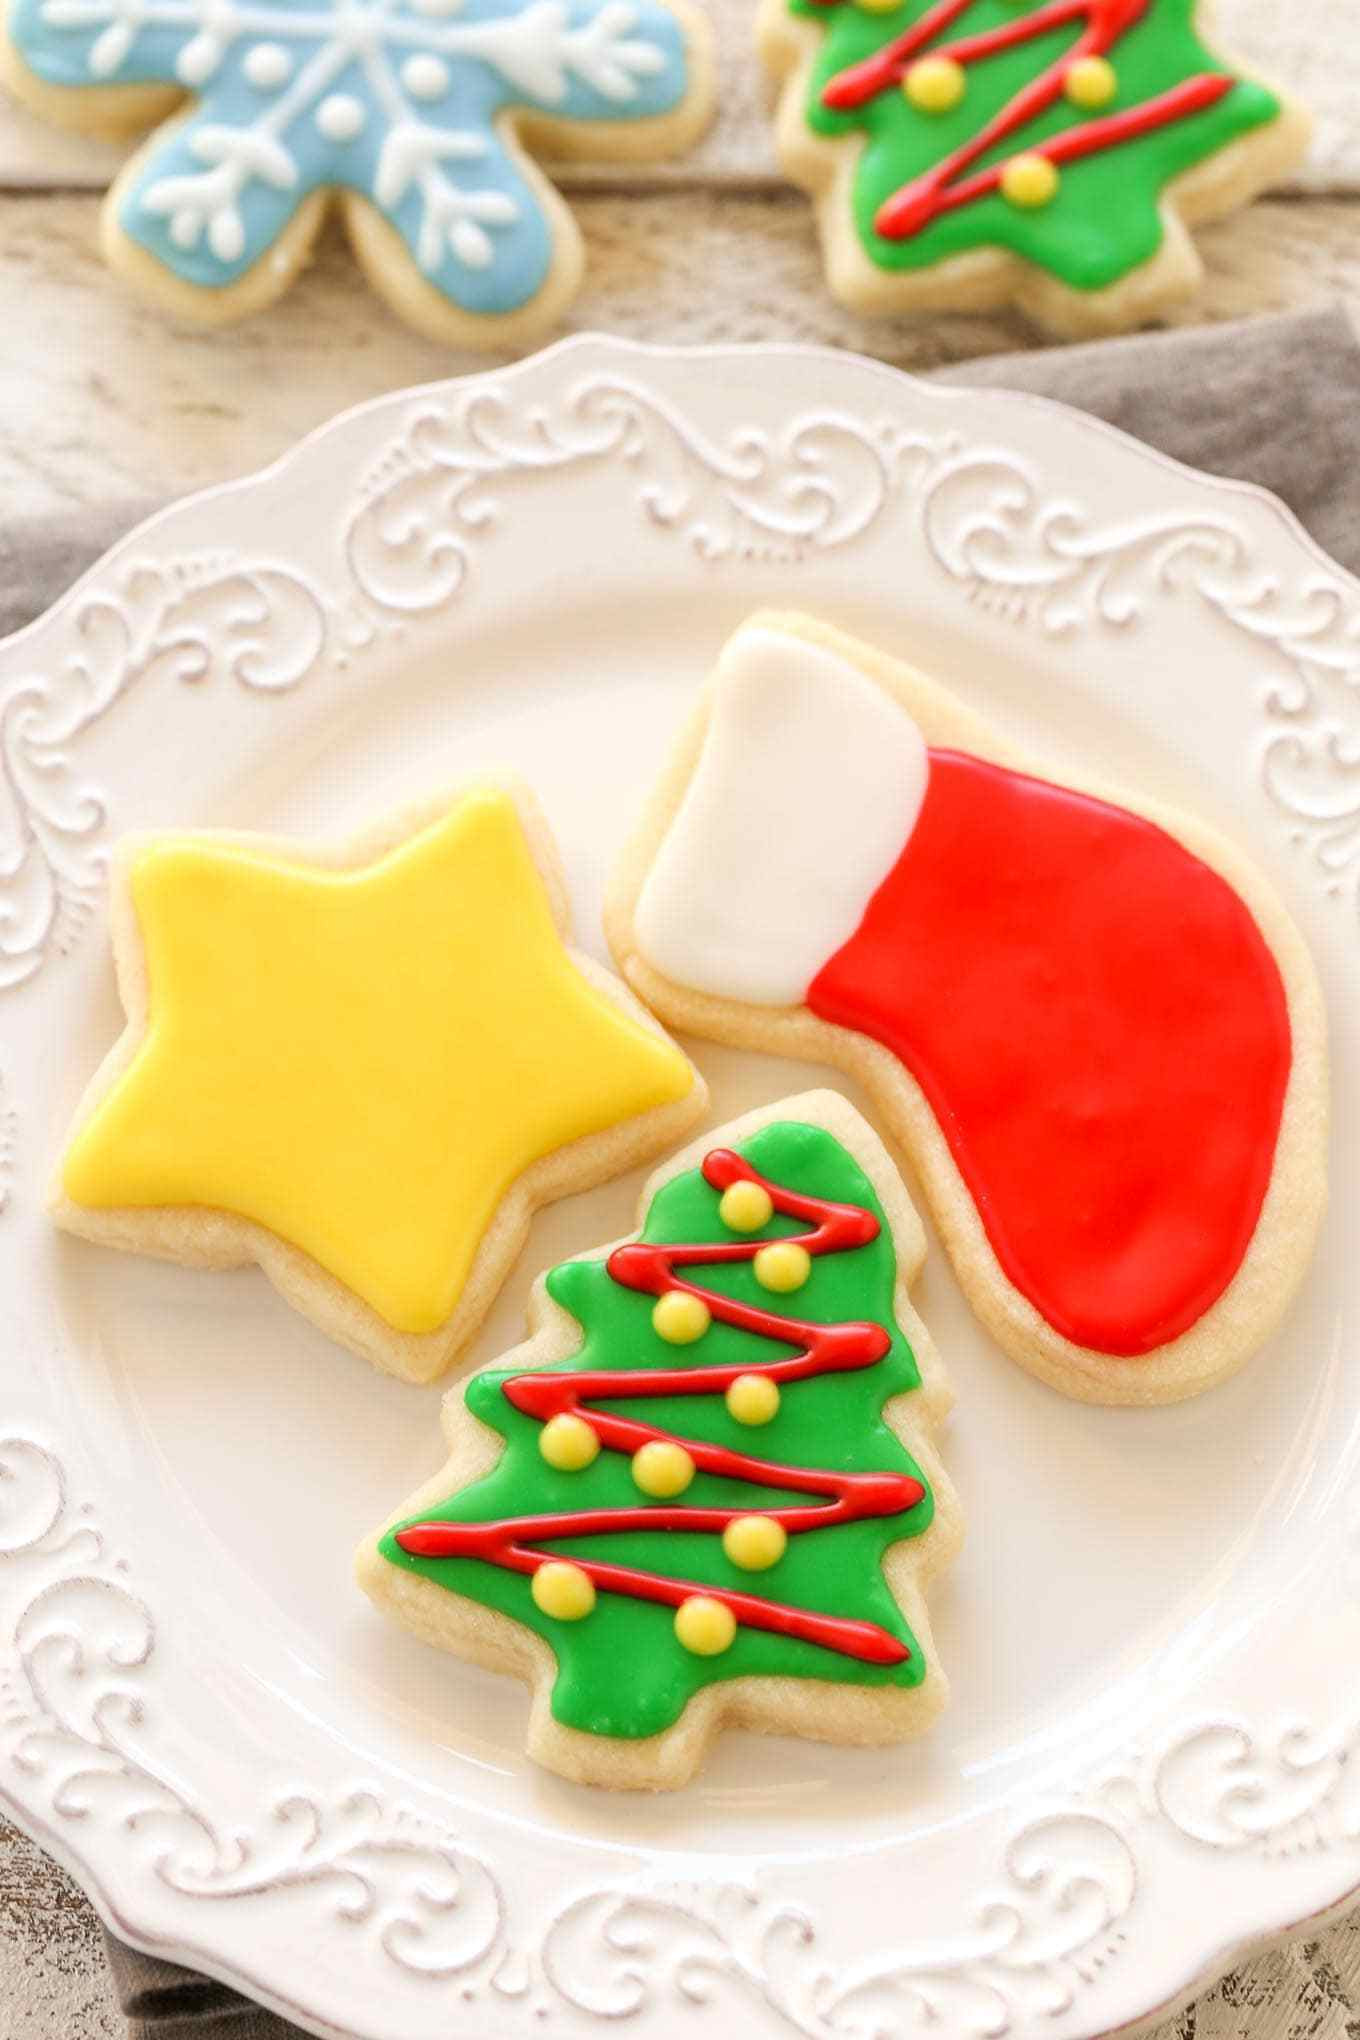 Roll Out Christmas Cookies
 Soft Christmas Cut Out Sugar Cookies Live Well Bake ten